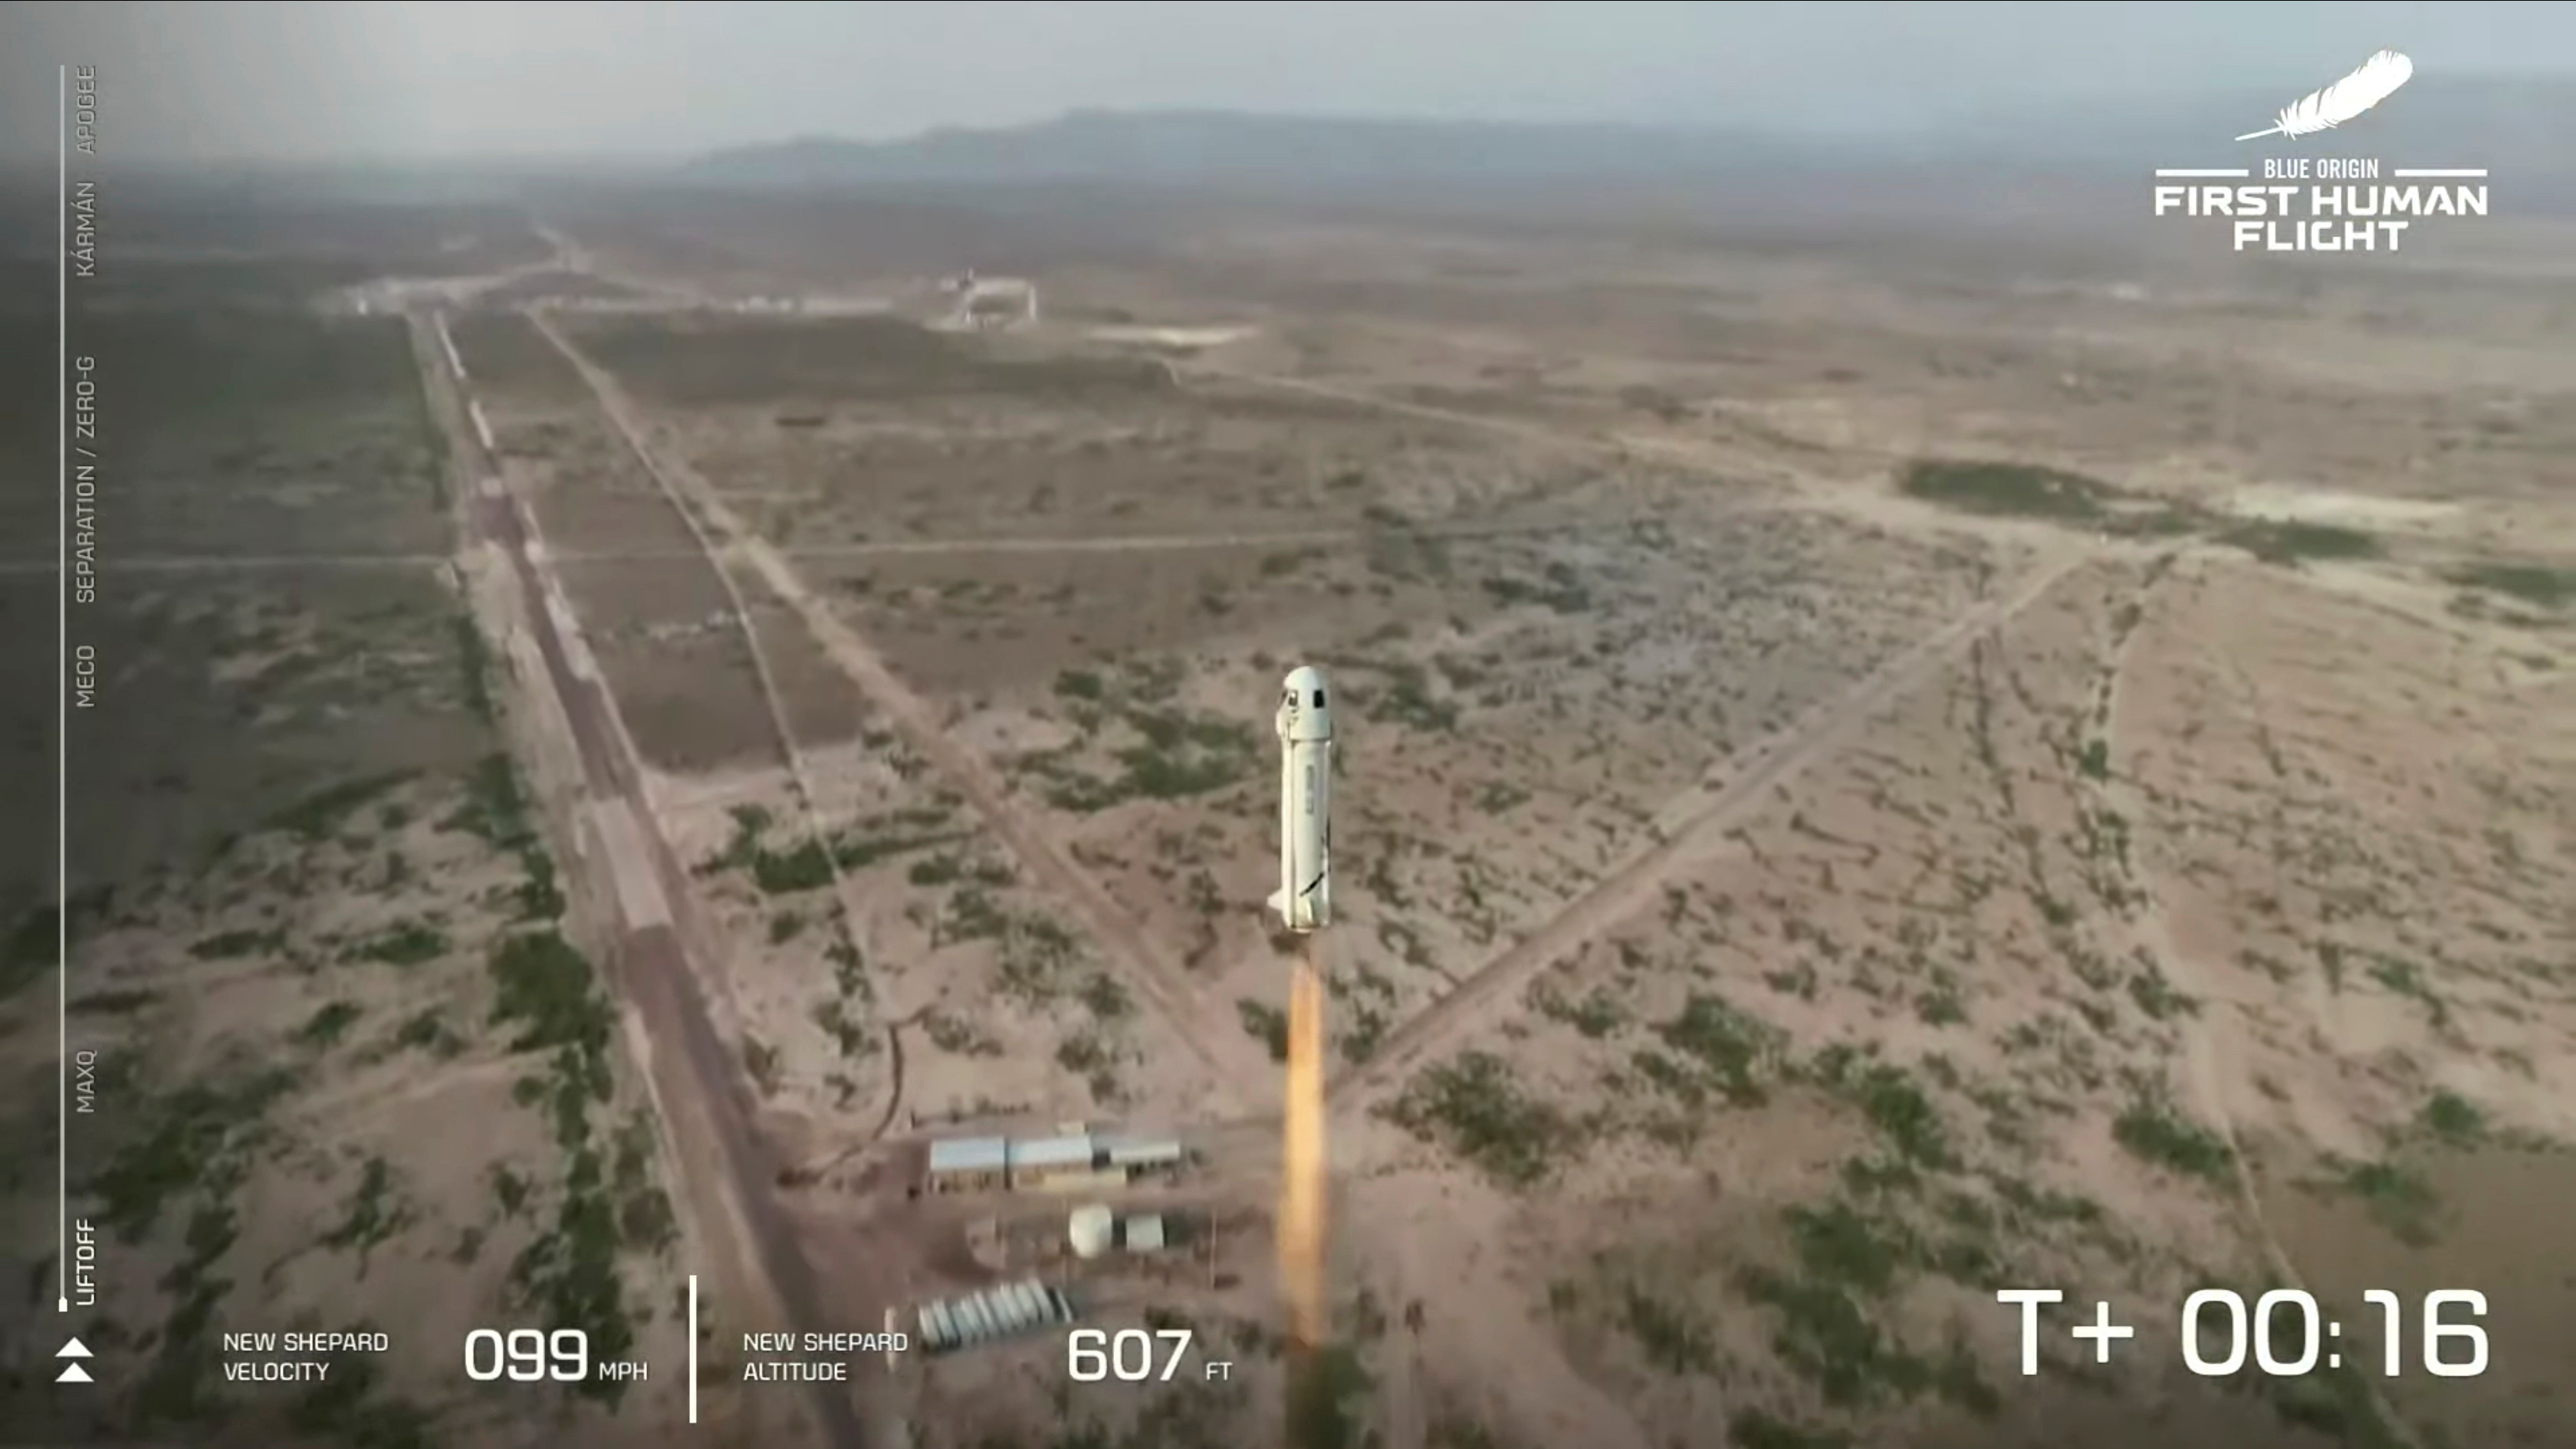 Billionaire businessman Jeff Bezos is launched with three crew members aboard a New Shepard rocket on the world's first unpiloted suborbital flight from Blue Origin's Launch Site 1 near Van Horn, Texas, U.S., July 20, 2021 in a still image from video.  Blue Origin/Handout via REUTERS.